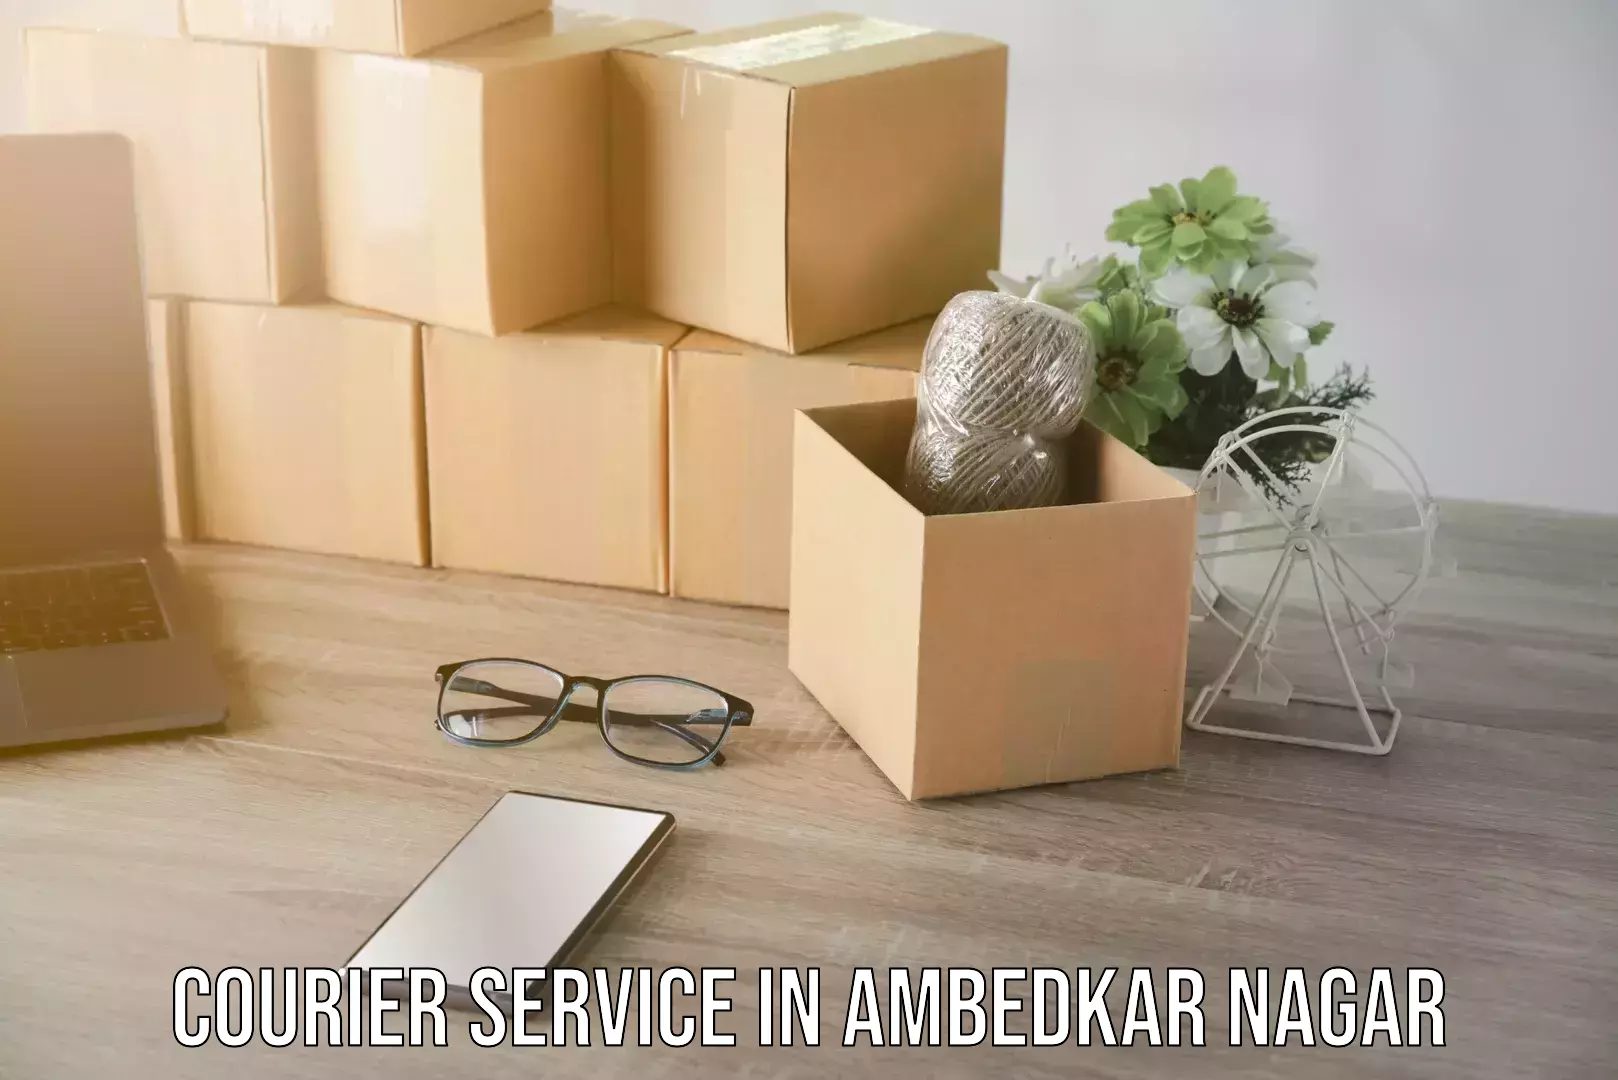 Next-day delivery options in Ambedkar Nagar